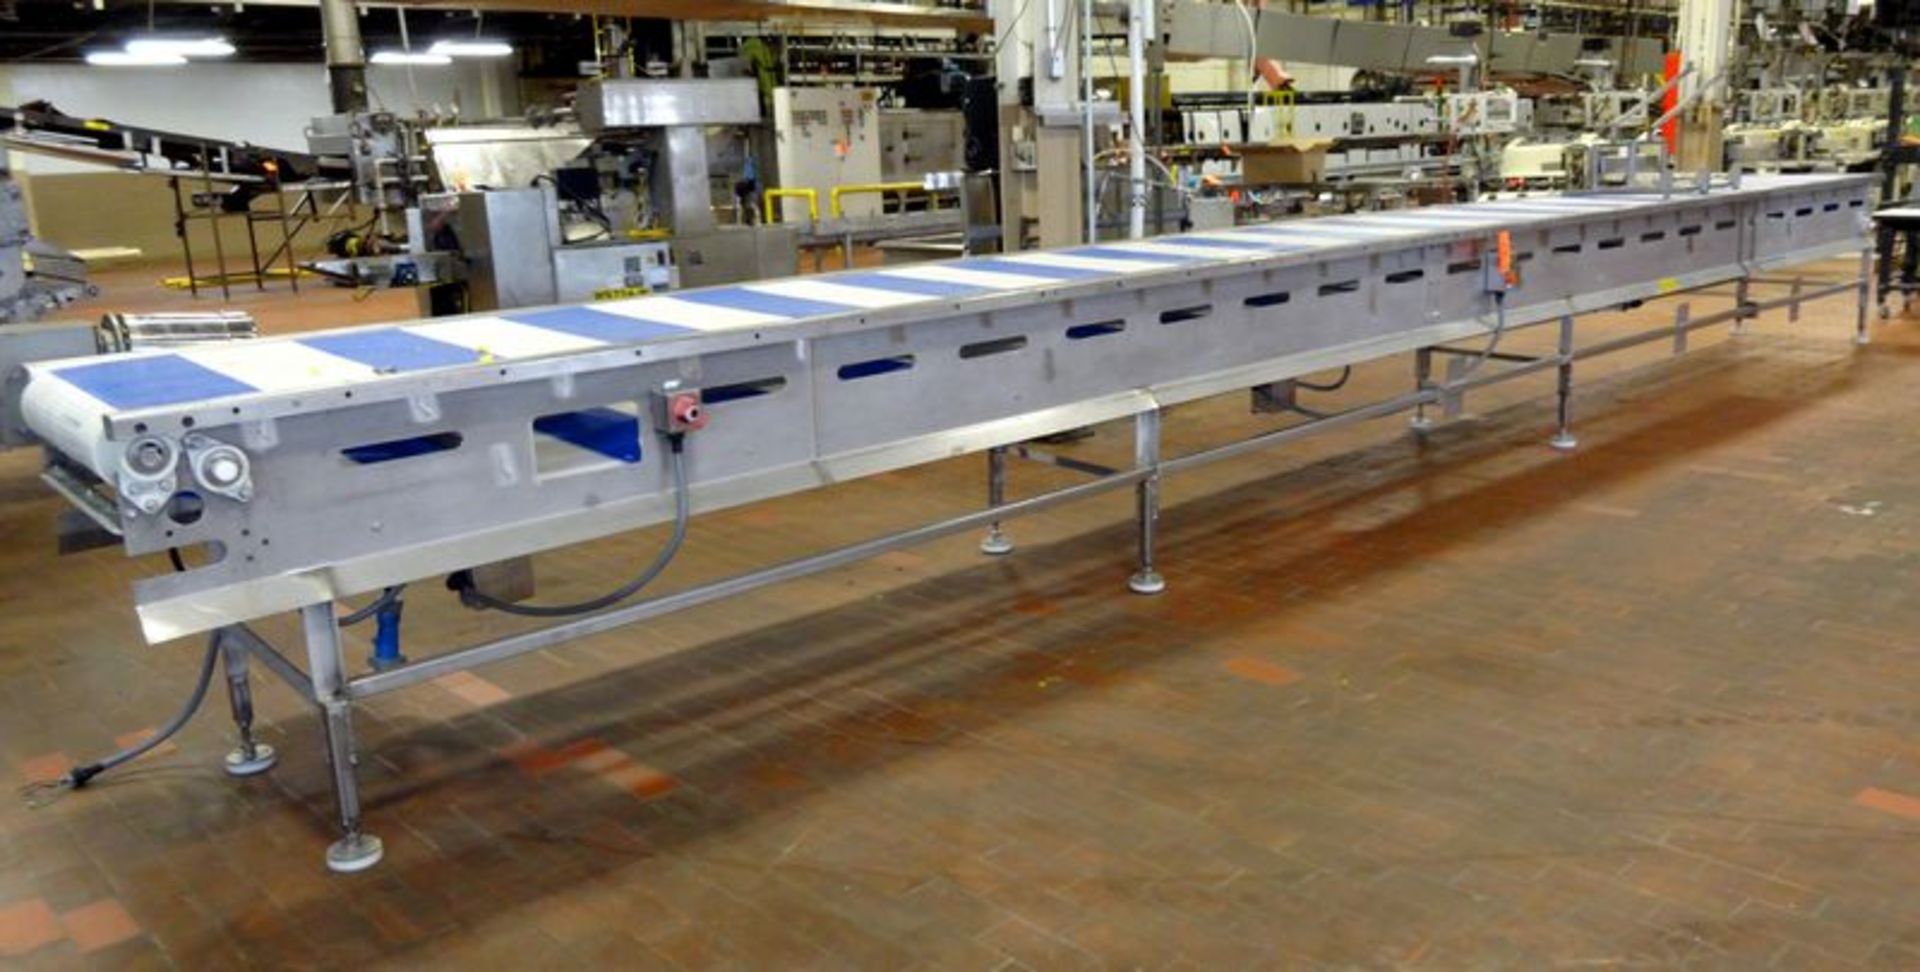 E-Quip plastic belt conveyor. Approximate 24" wide x 30' long. Stainless steel frame with motor.